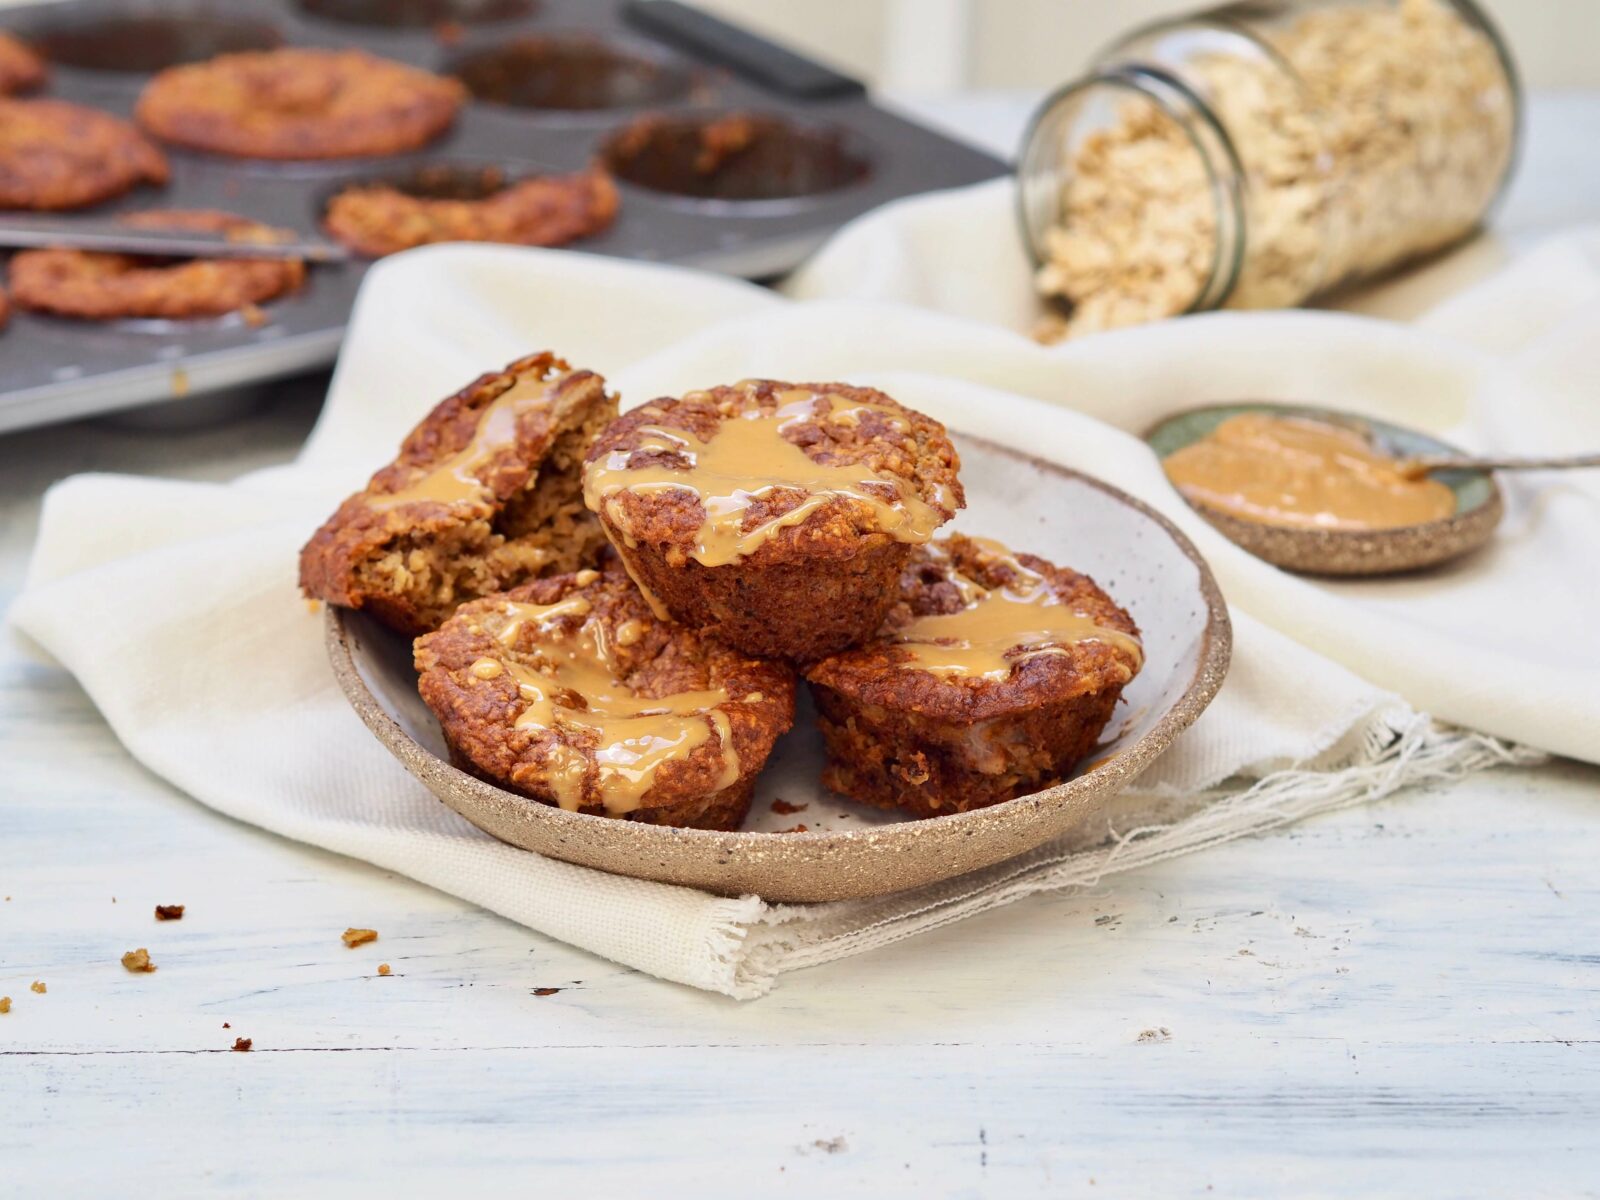 Try these healthier Peanut Butter Muffins from Back to Basics Pregnancy for an easy snack or fibre-rich option. As a prenatal nutritionist, I've eaten plenty of them during my own pregnancy. Image: Lyndi Cohen